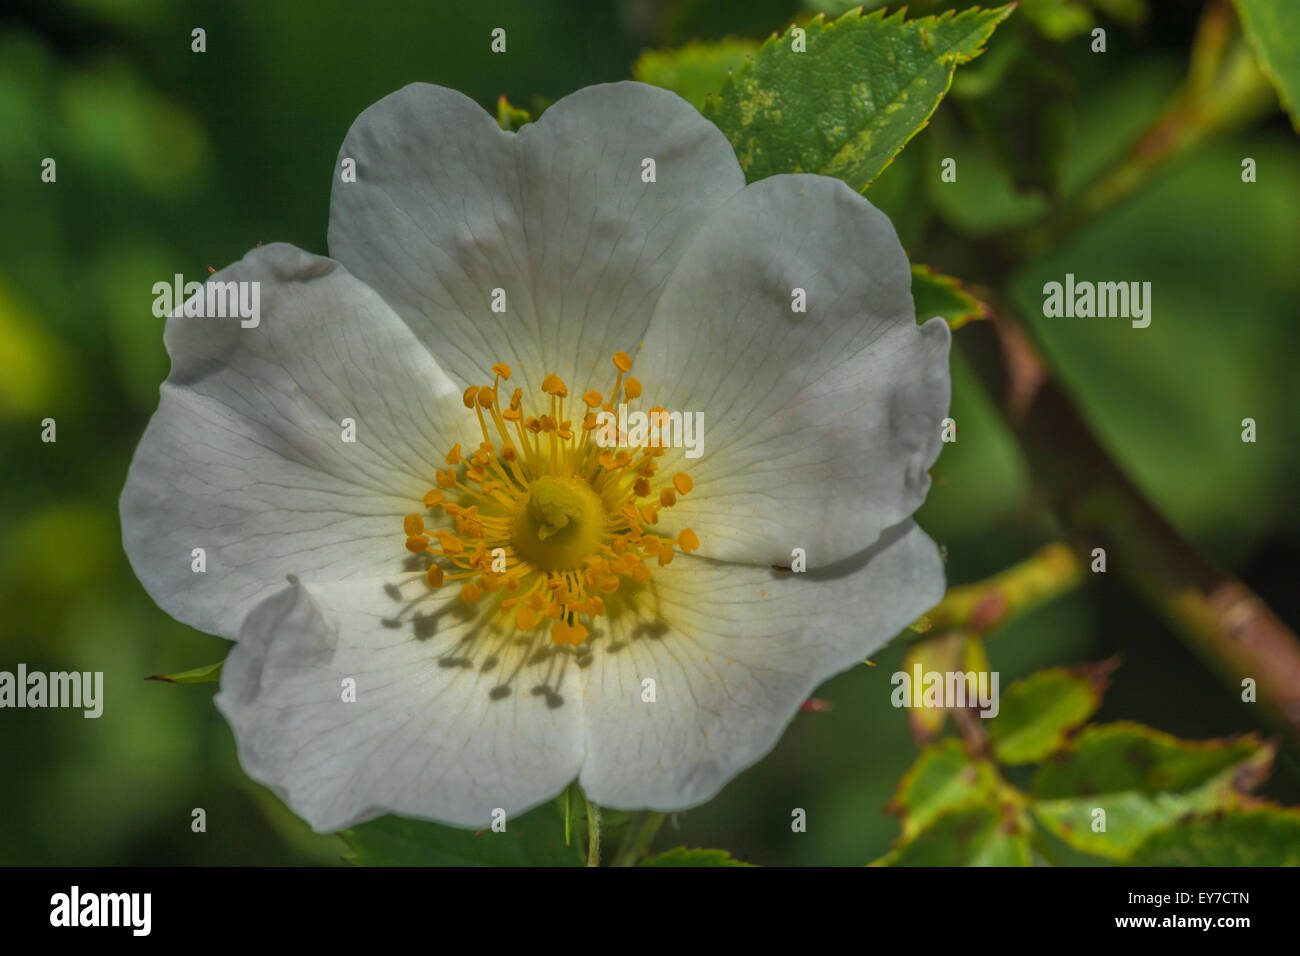 Flower of a wild / Dog Rose / Rosa canina. Key focus is on the anthers and yellow inner parts. Stock Photo